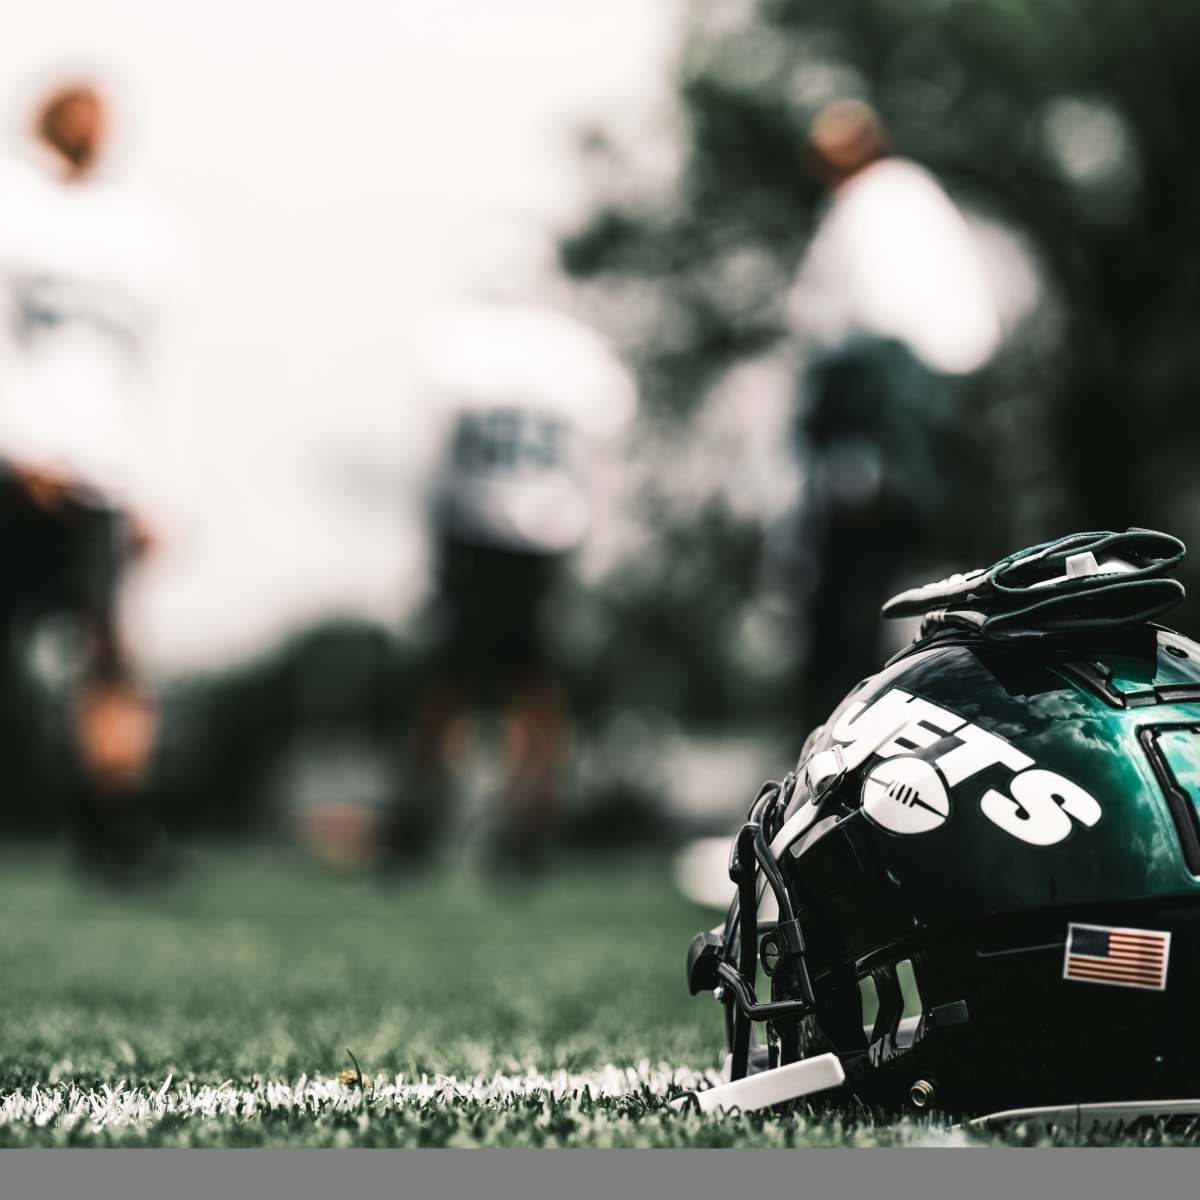 New York Jets schedule breakdown for the 2021 regular season - Sports  Illustrated New York Jets News, Analysis and More